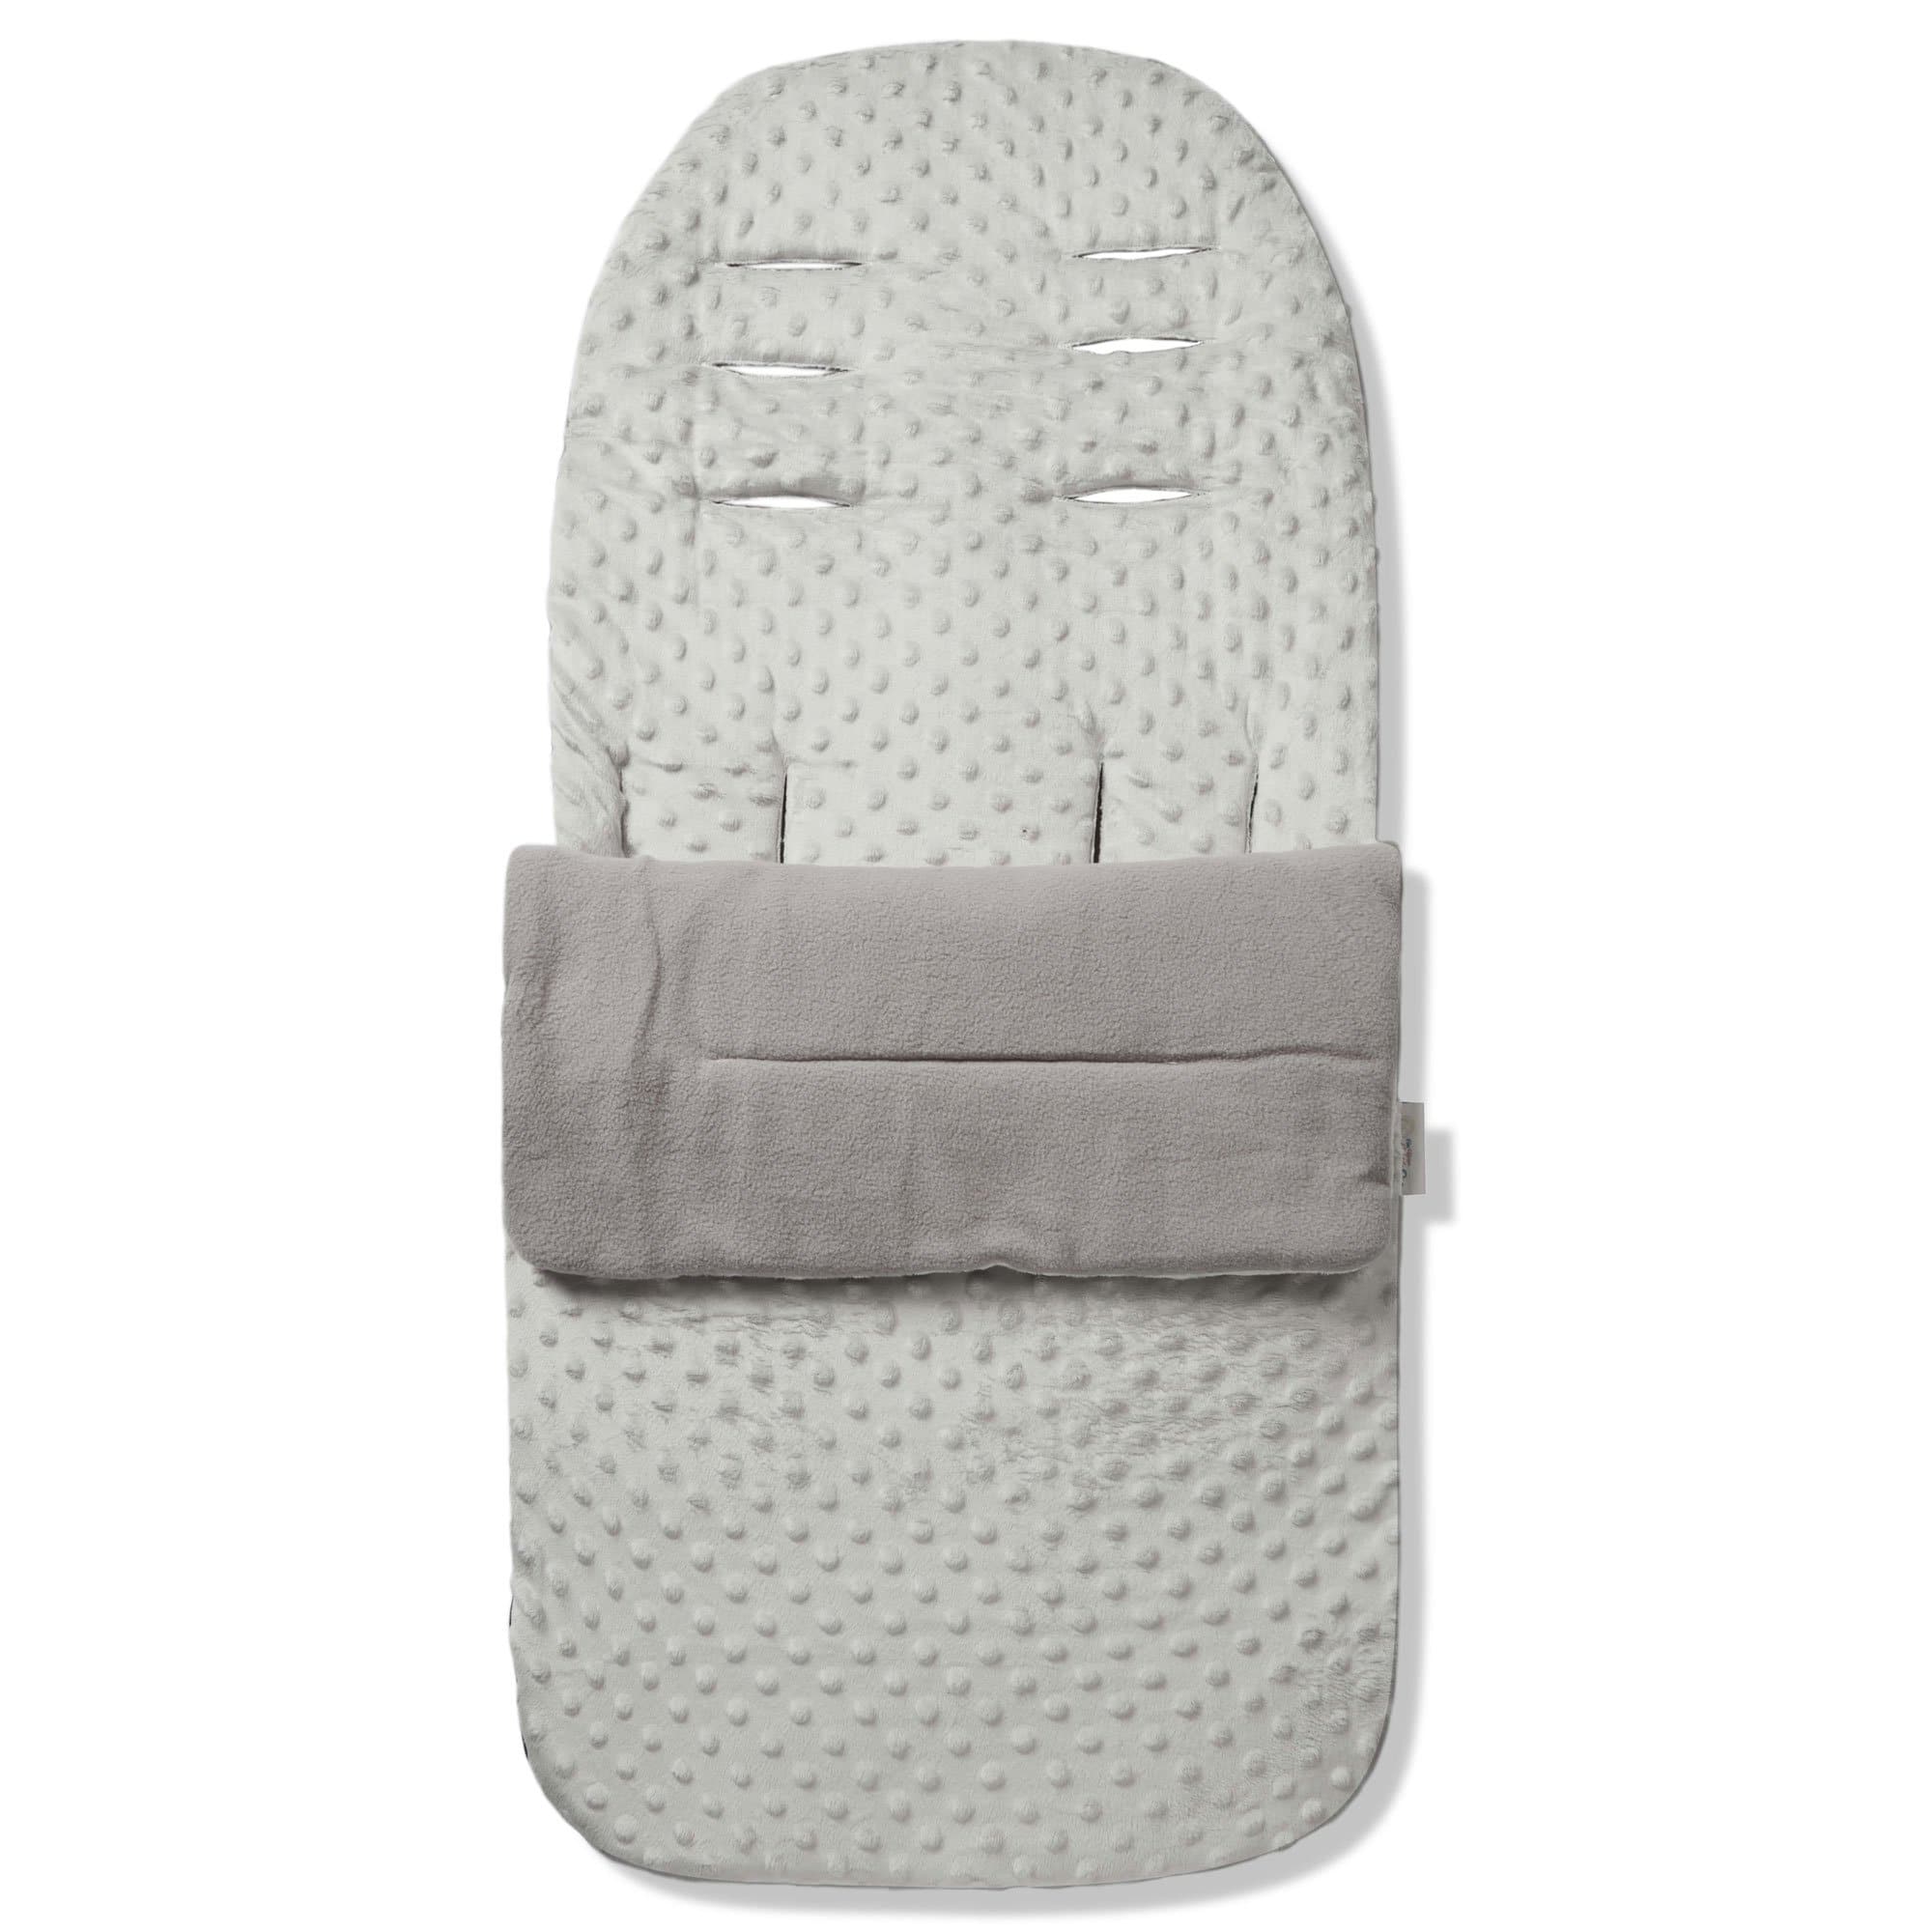 Dimple Footmuff / Cosy Toes Compatible with Concord - Grey / Fits All Models | For Your Little One